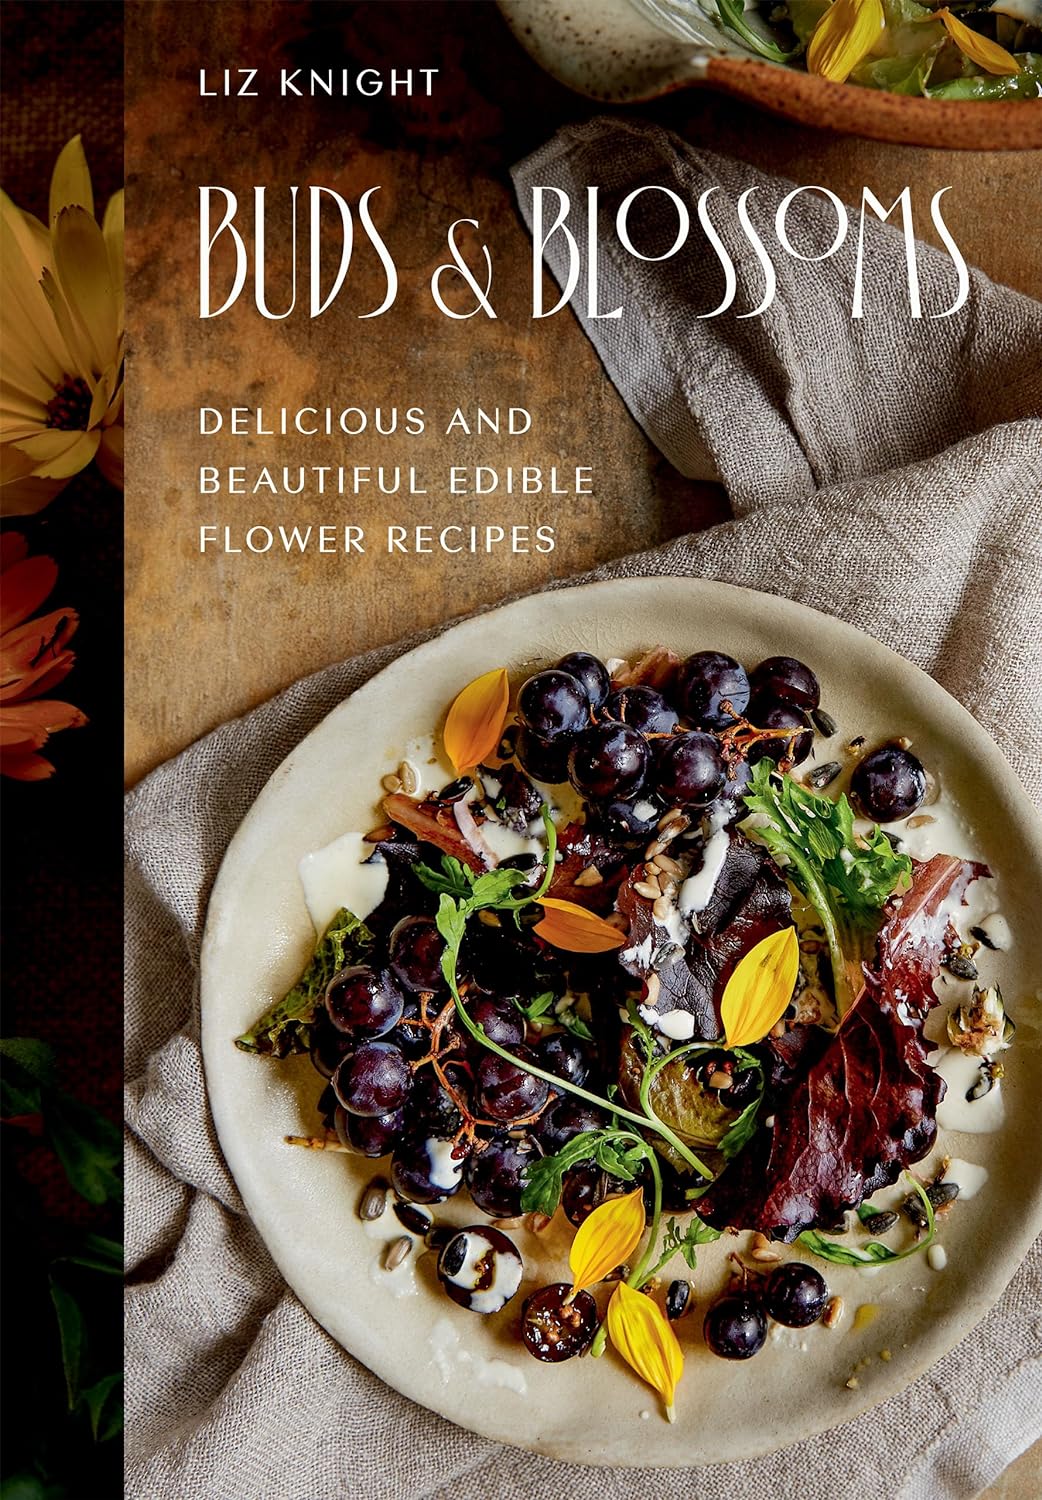 Buds and Blossoms: Delicious and Beautiful Edible Flower Recipes (Liz Knight)